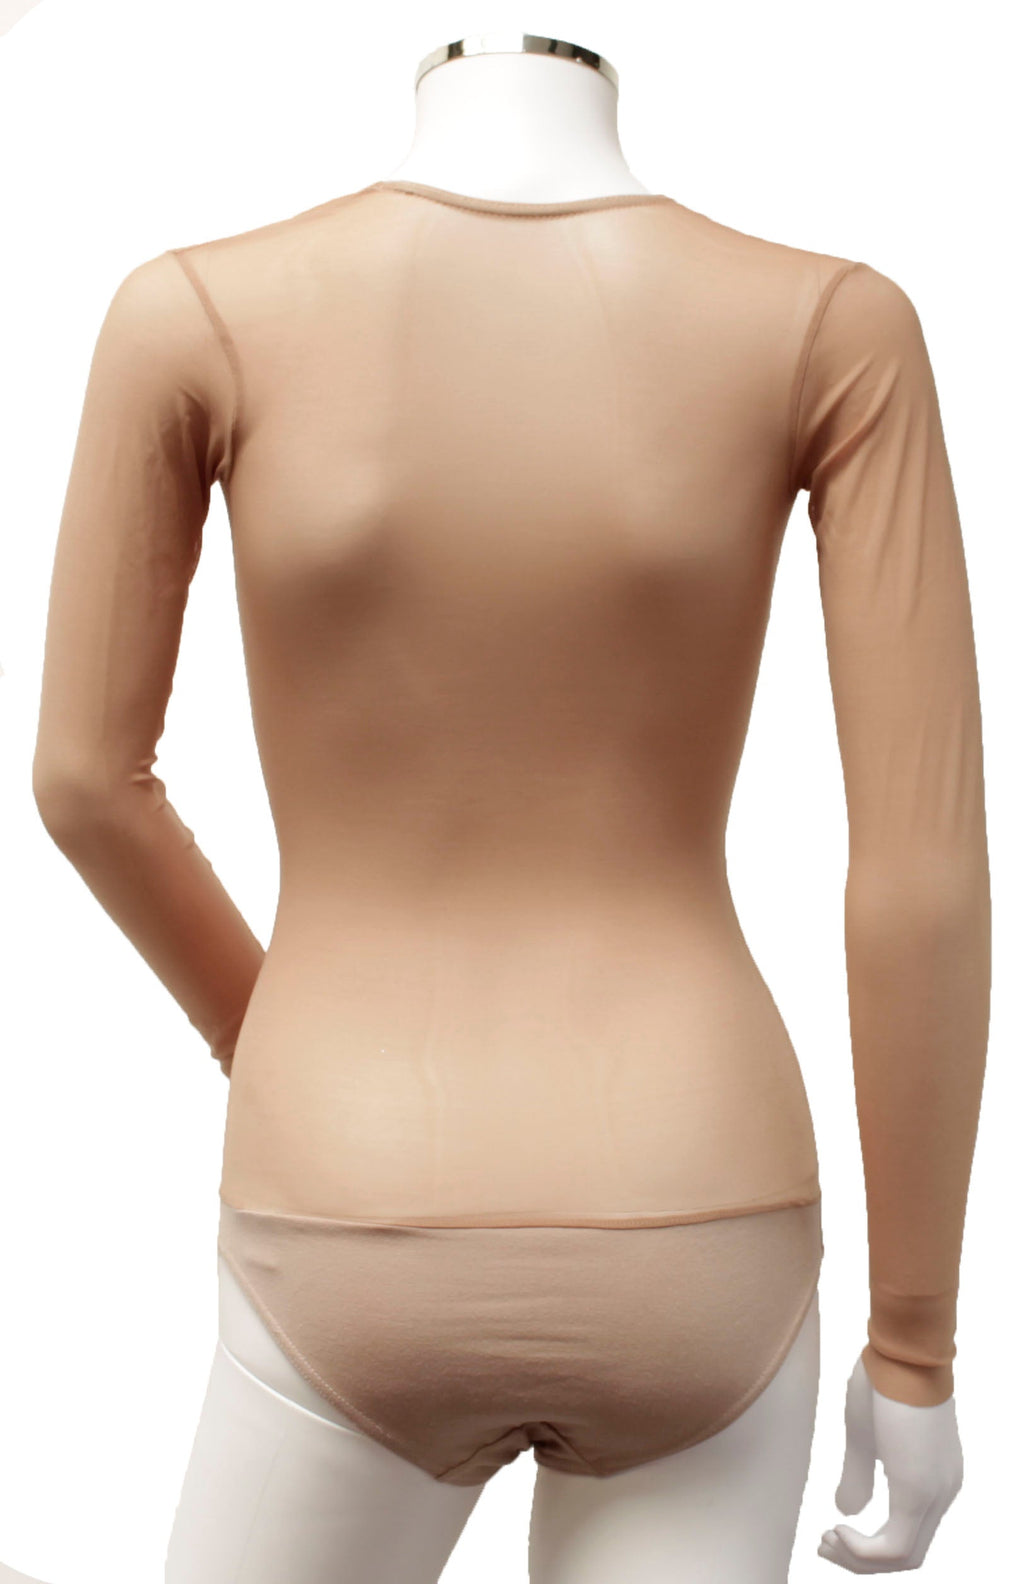 IN STOCK - Underbust with Sleeves - Old Naturelle